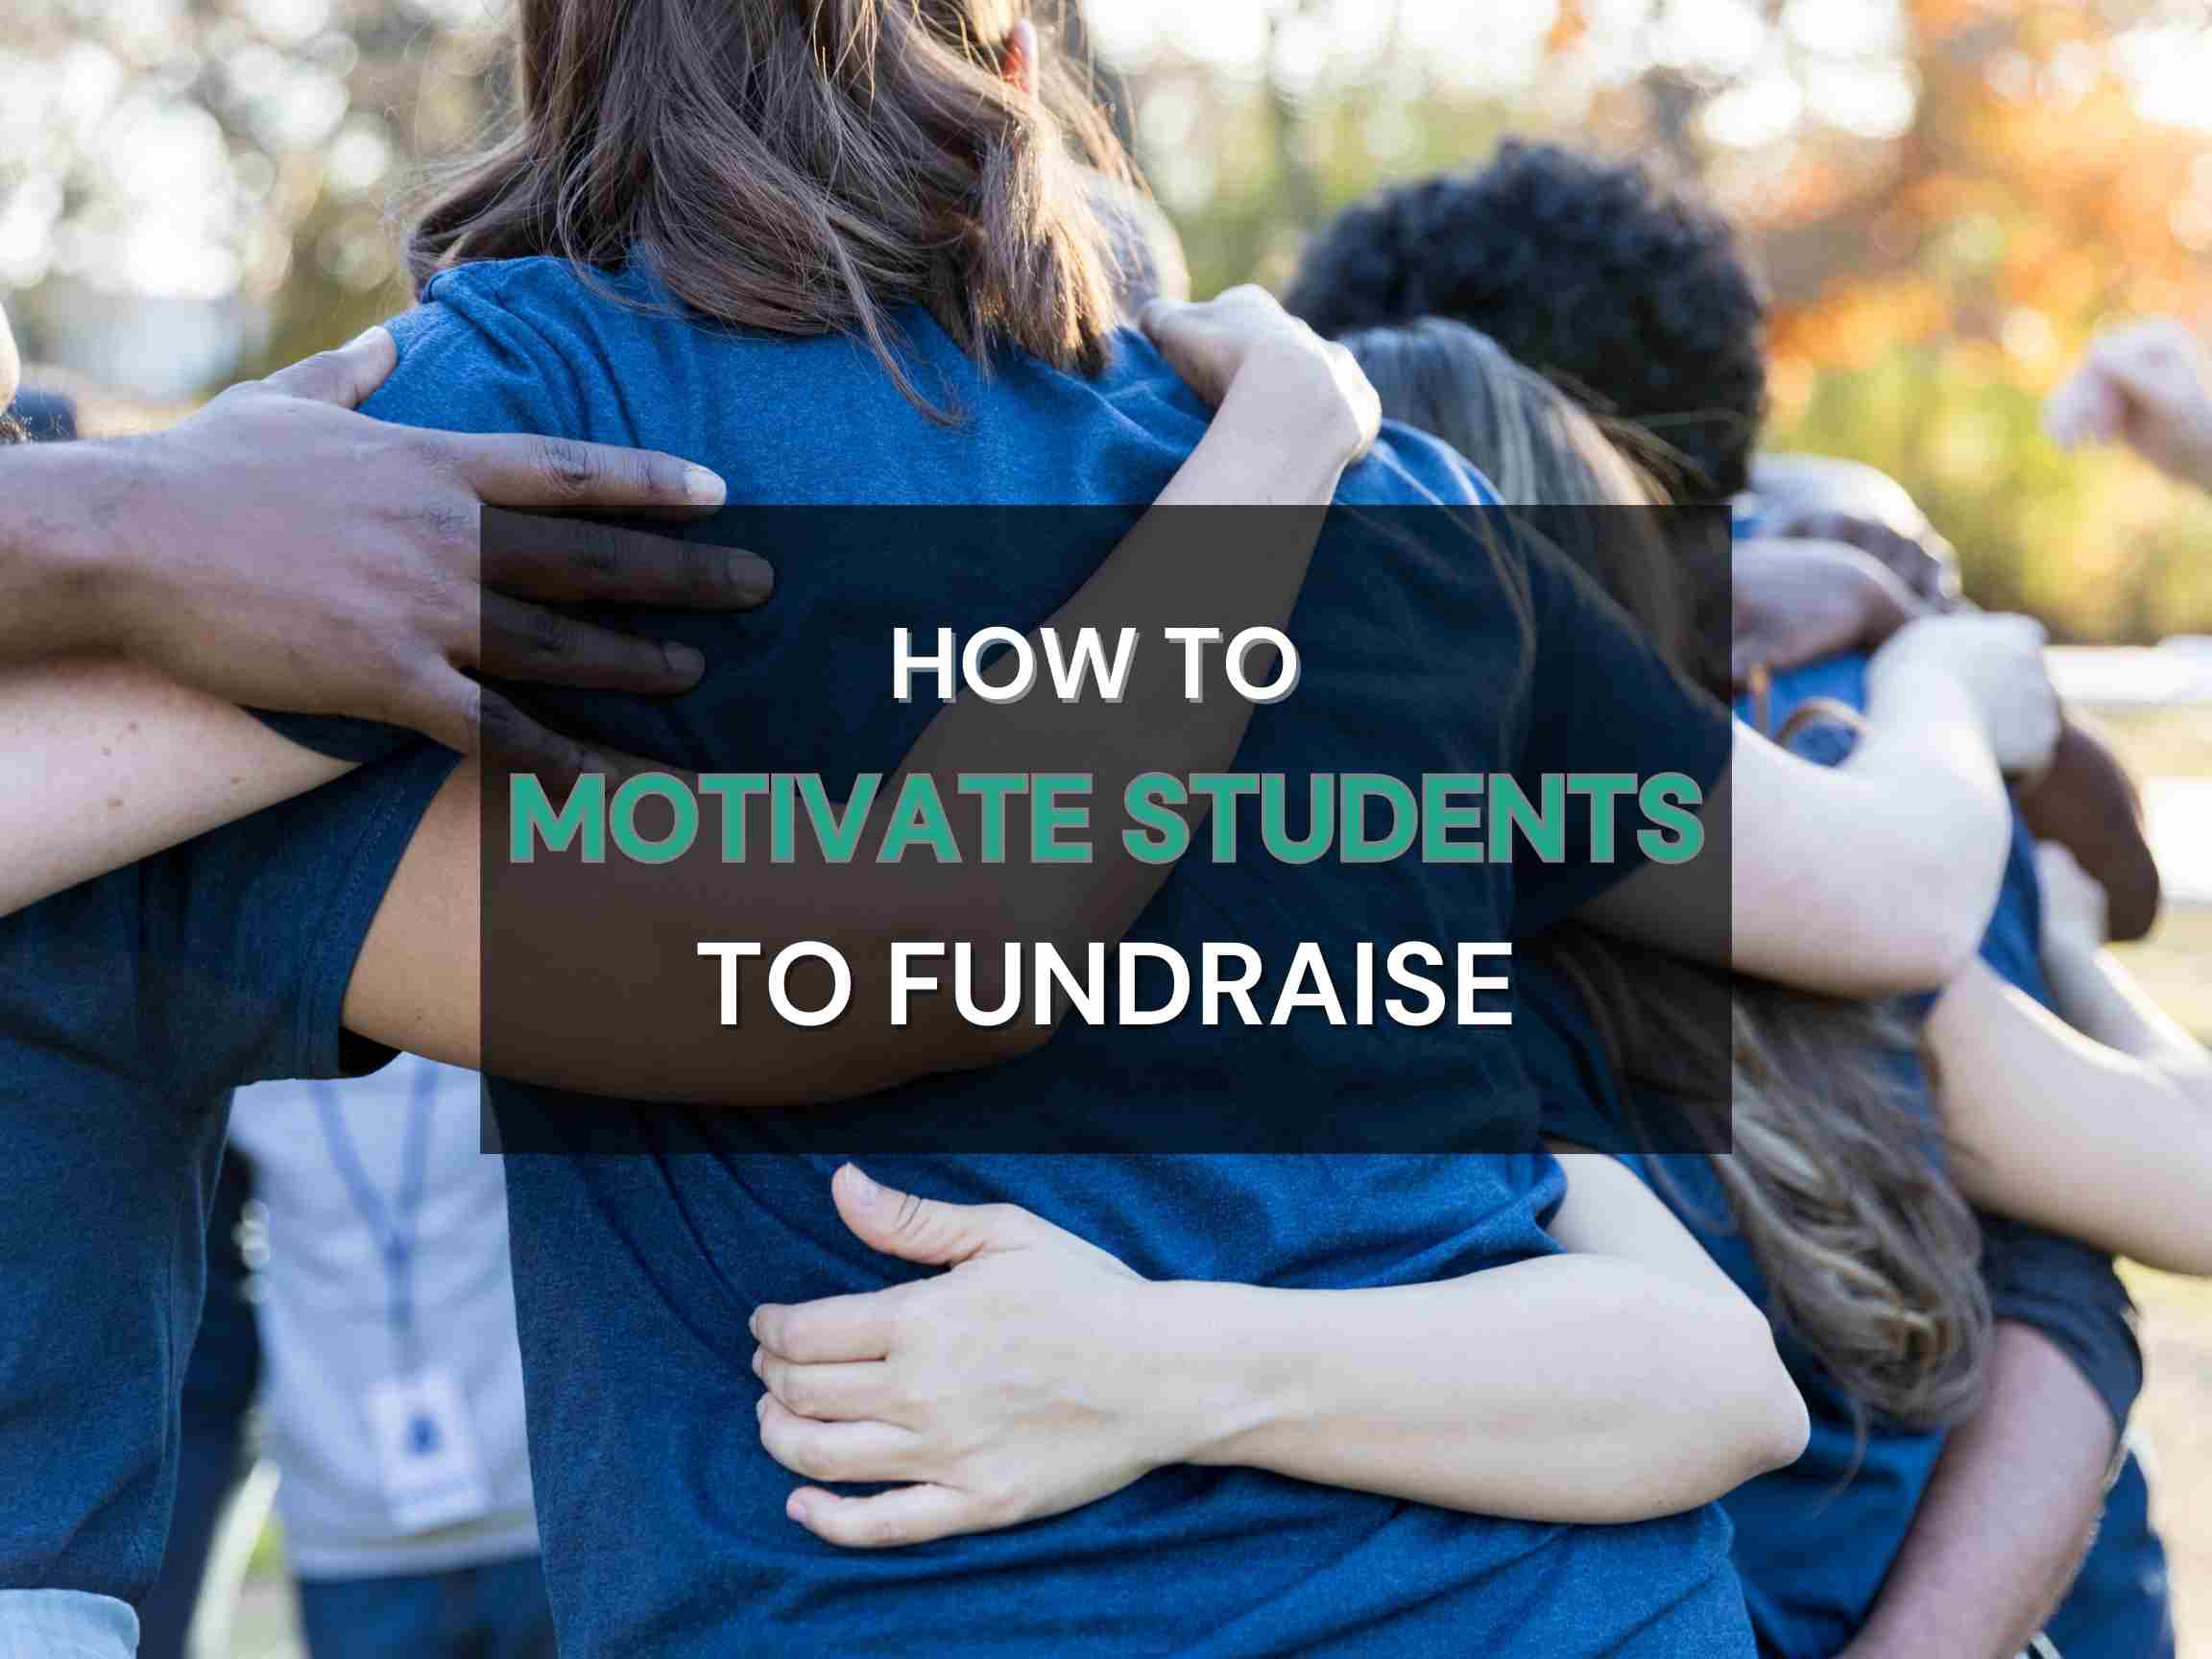 How to motivate students to fundraise